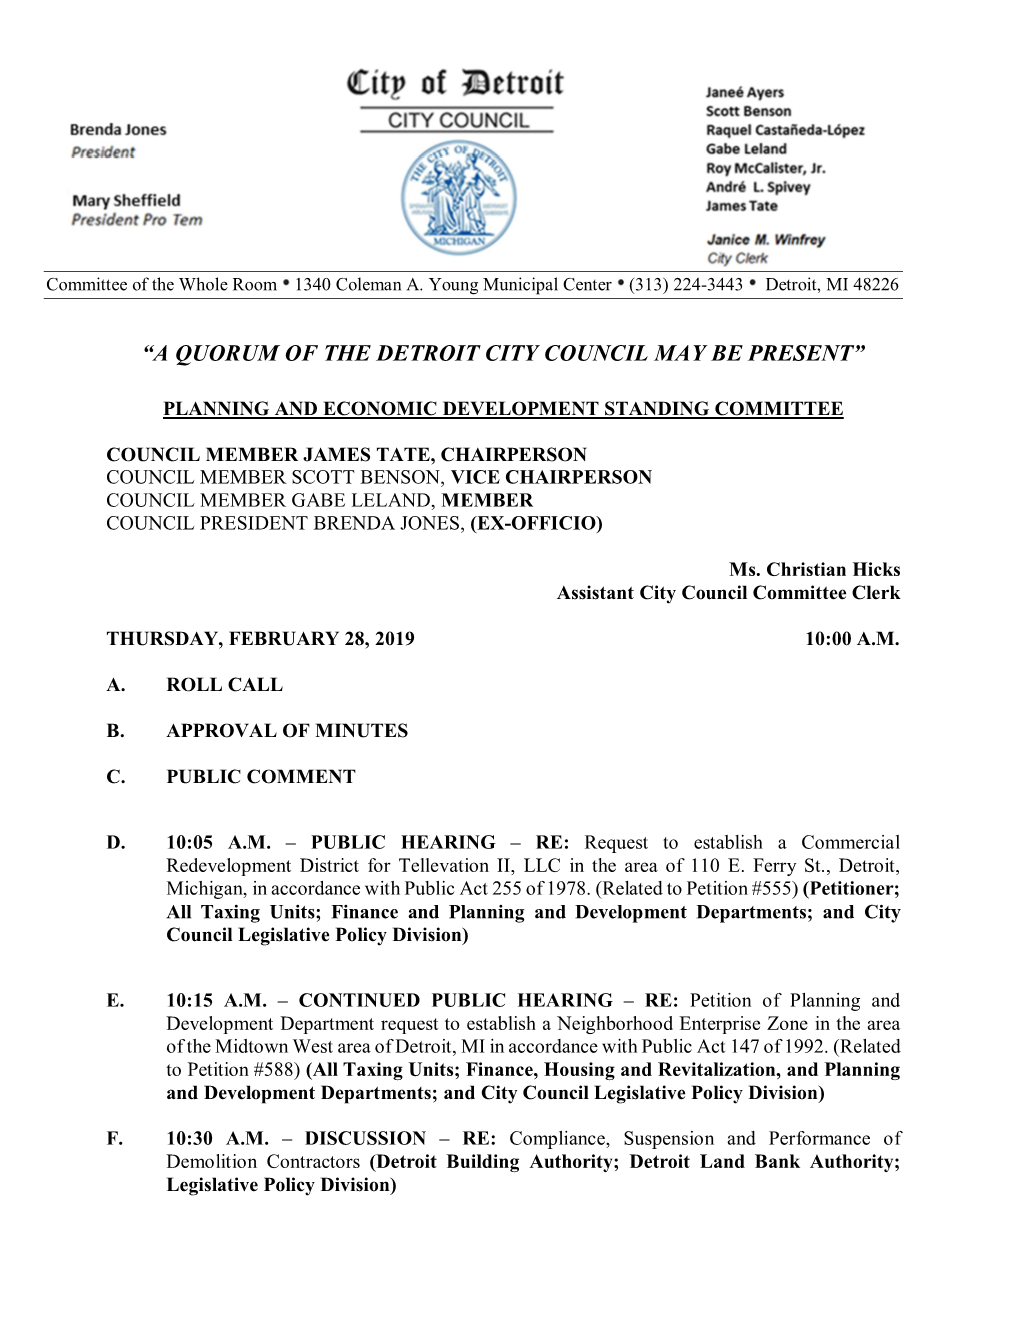 “A Quorum of the Detroit City Council May Be Present”